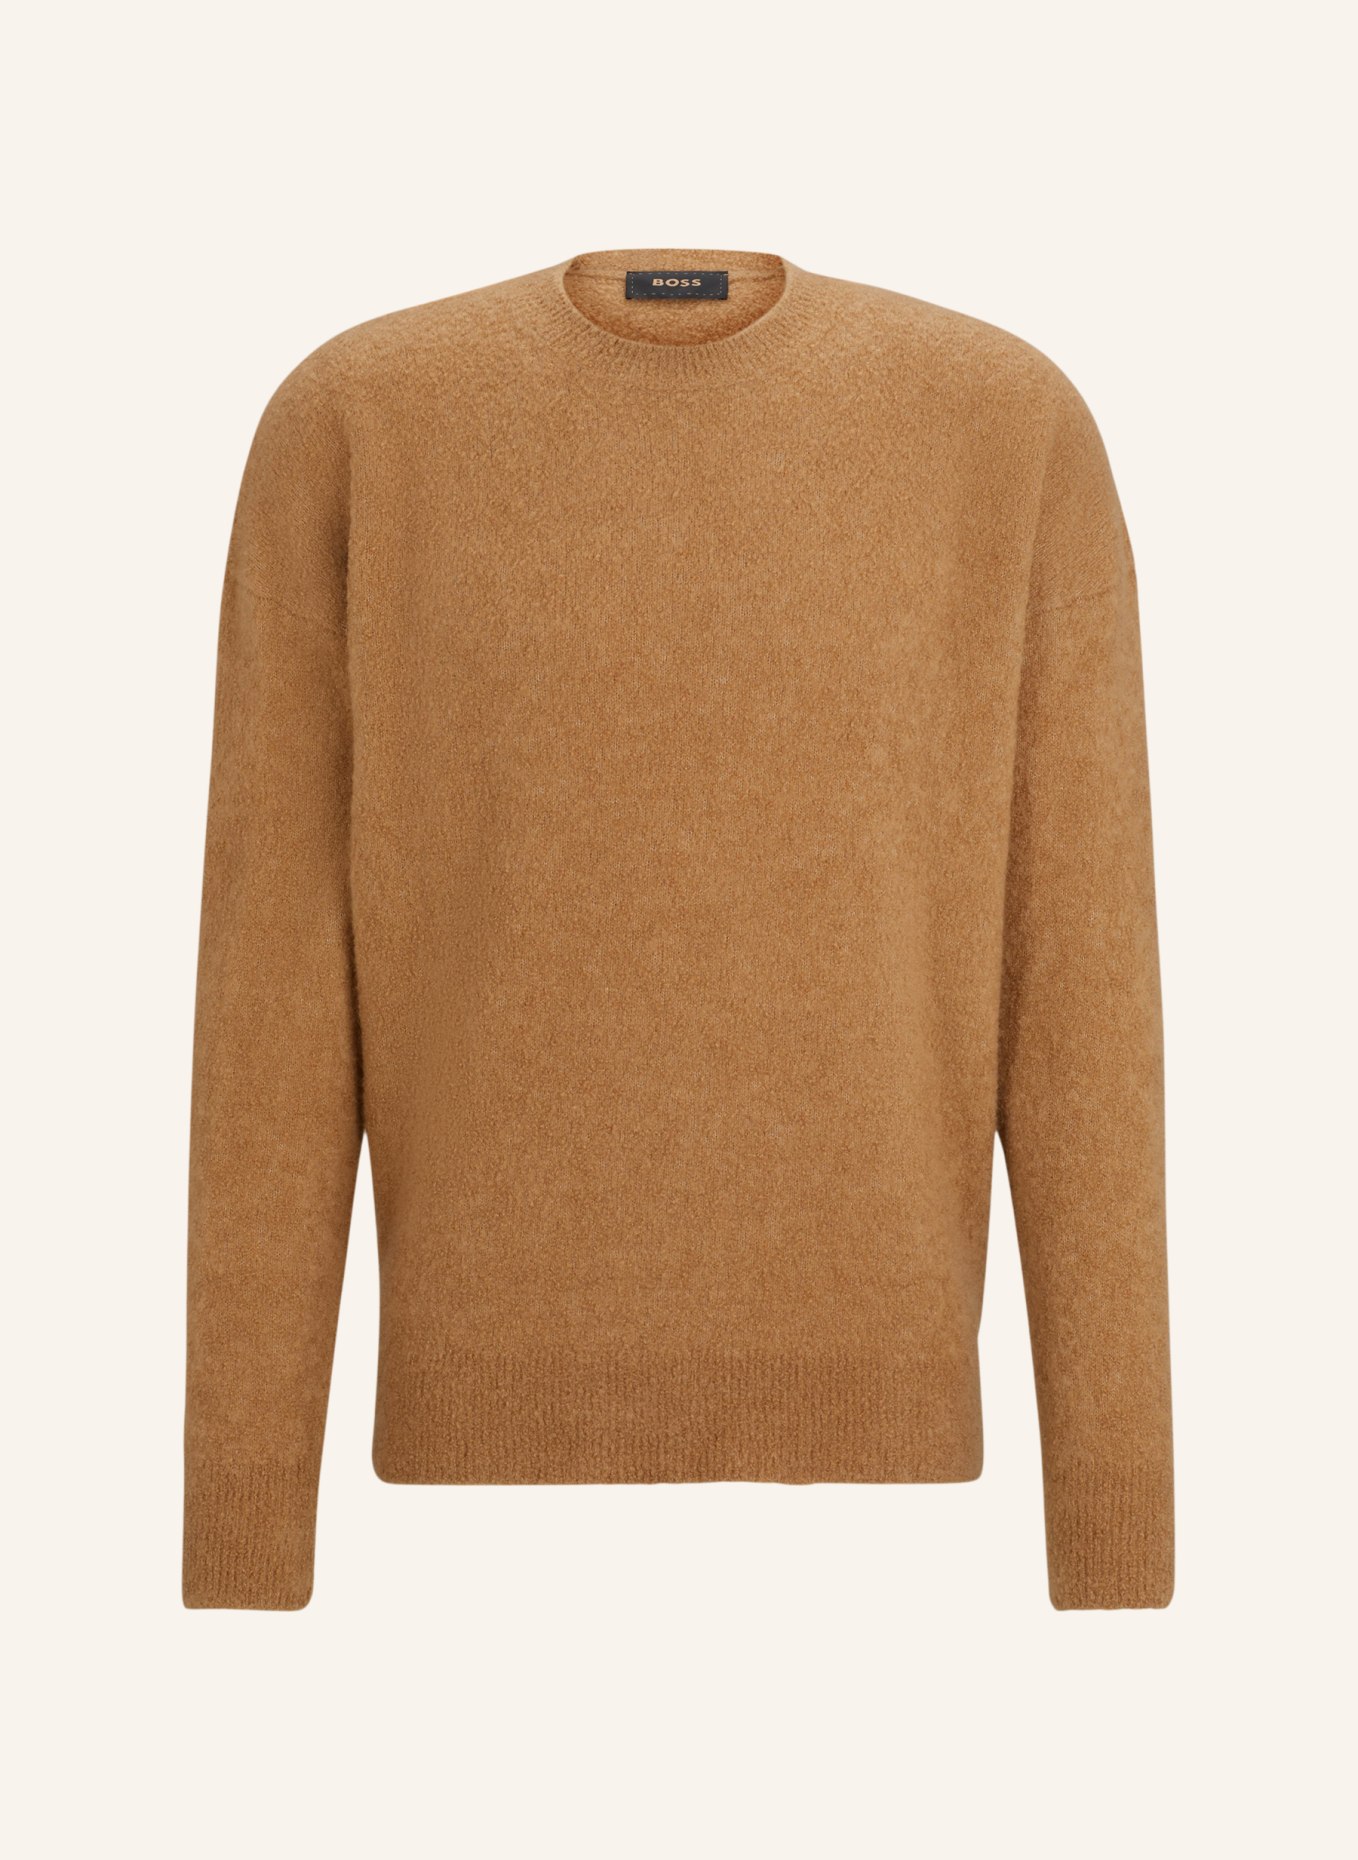 BOSS Pullover L-PERFETTO Relaxed Fit, Farbe: BEIGE (Bild 1)